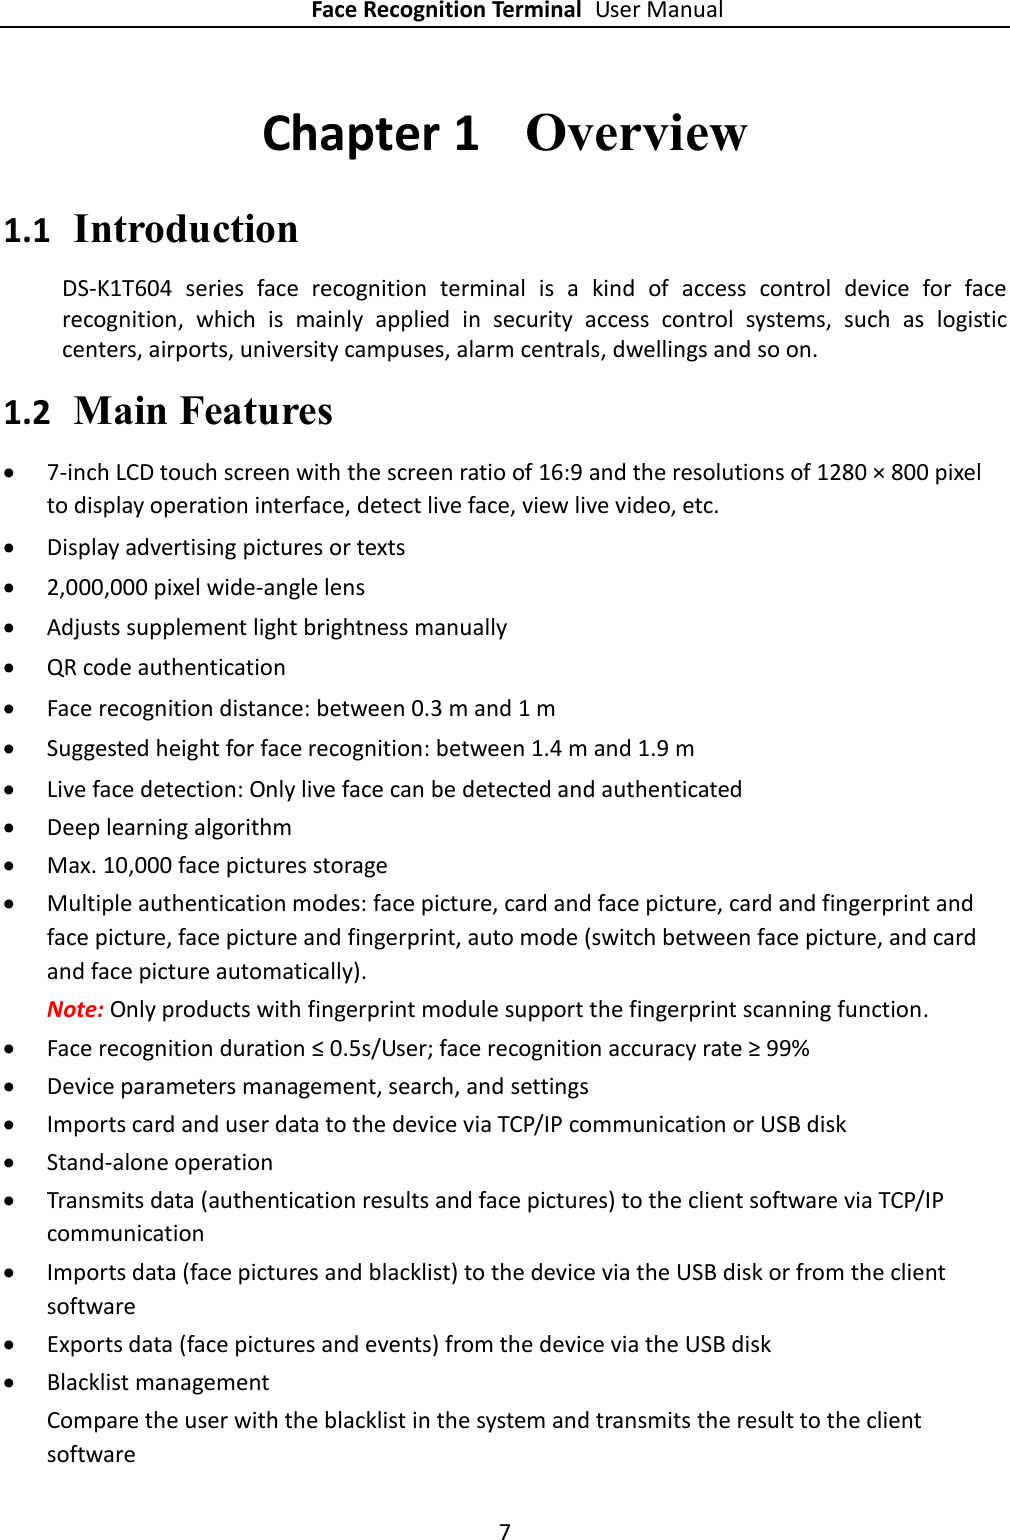 Page 8 of Hangzhou Hikvision Digital Technology K1T604 Face Recognition Terminal User Manual 